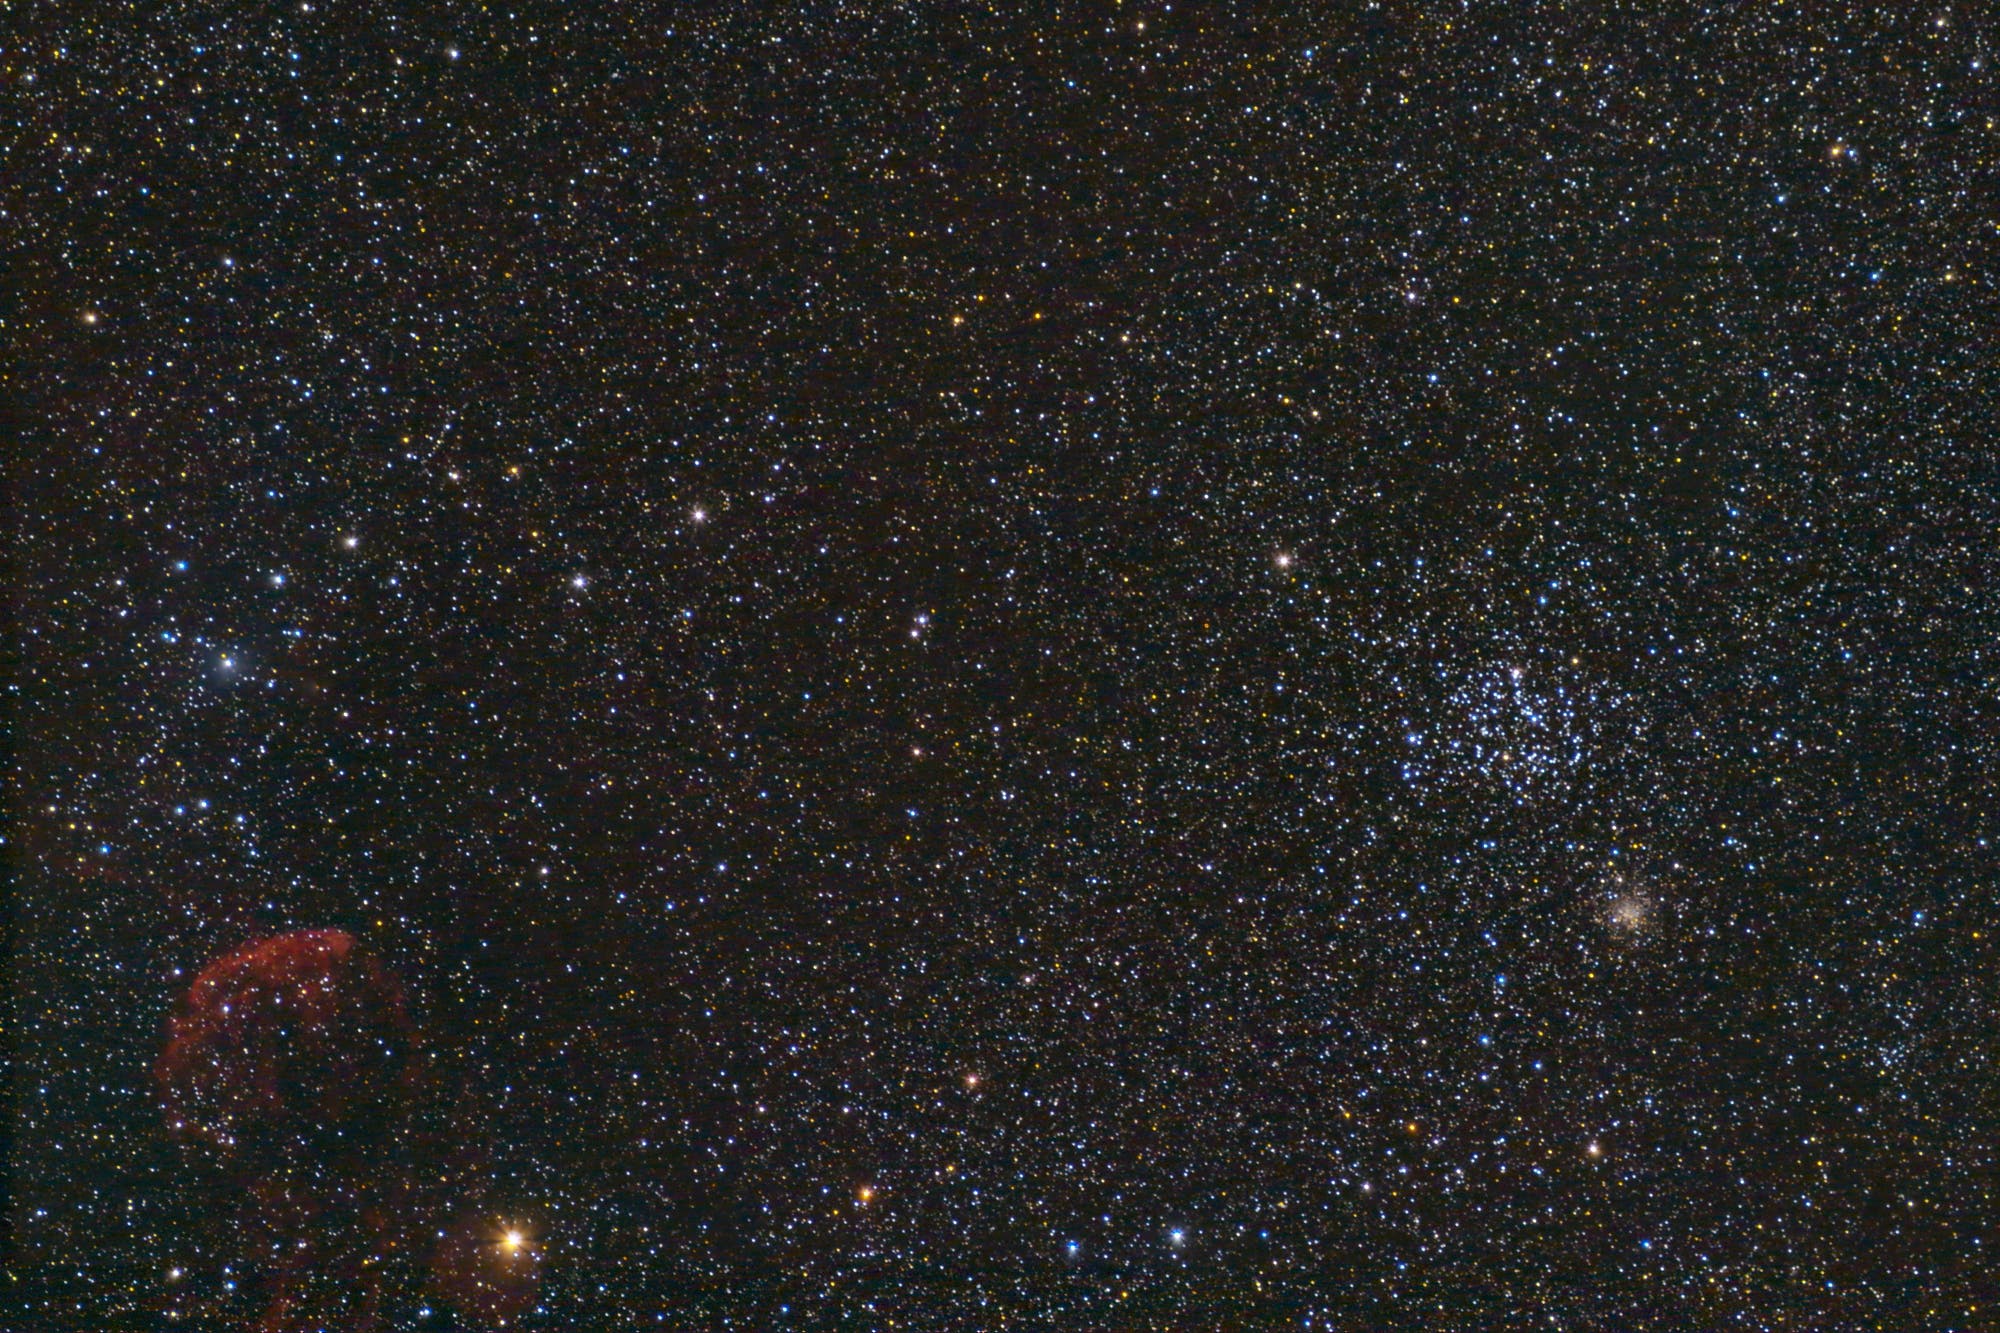 Am Fuß des Zwillings: IC 443, Messier 35 und NGC 2158